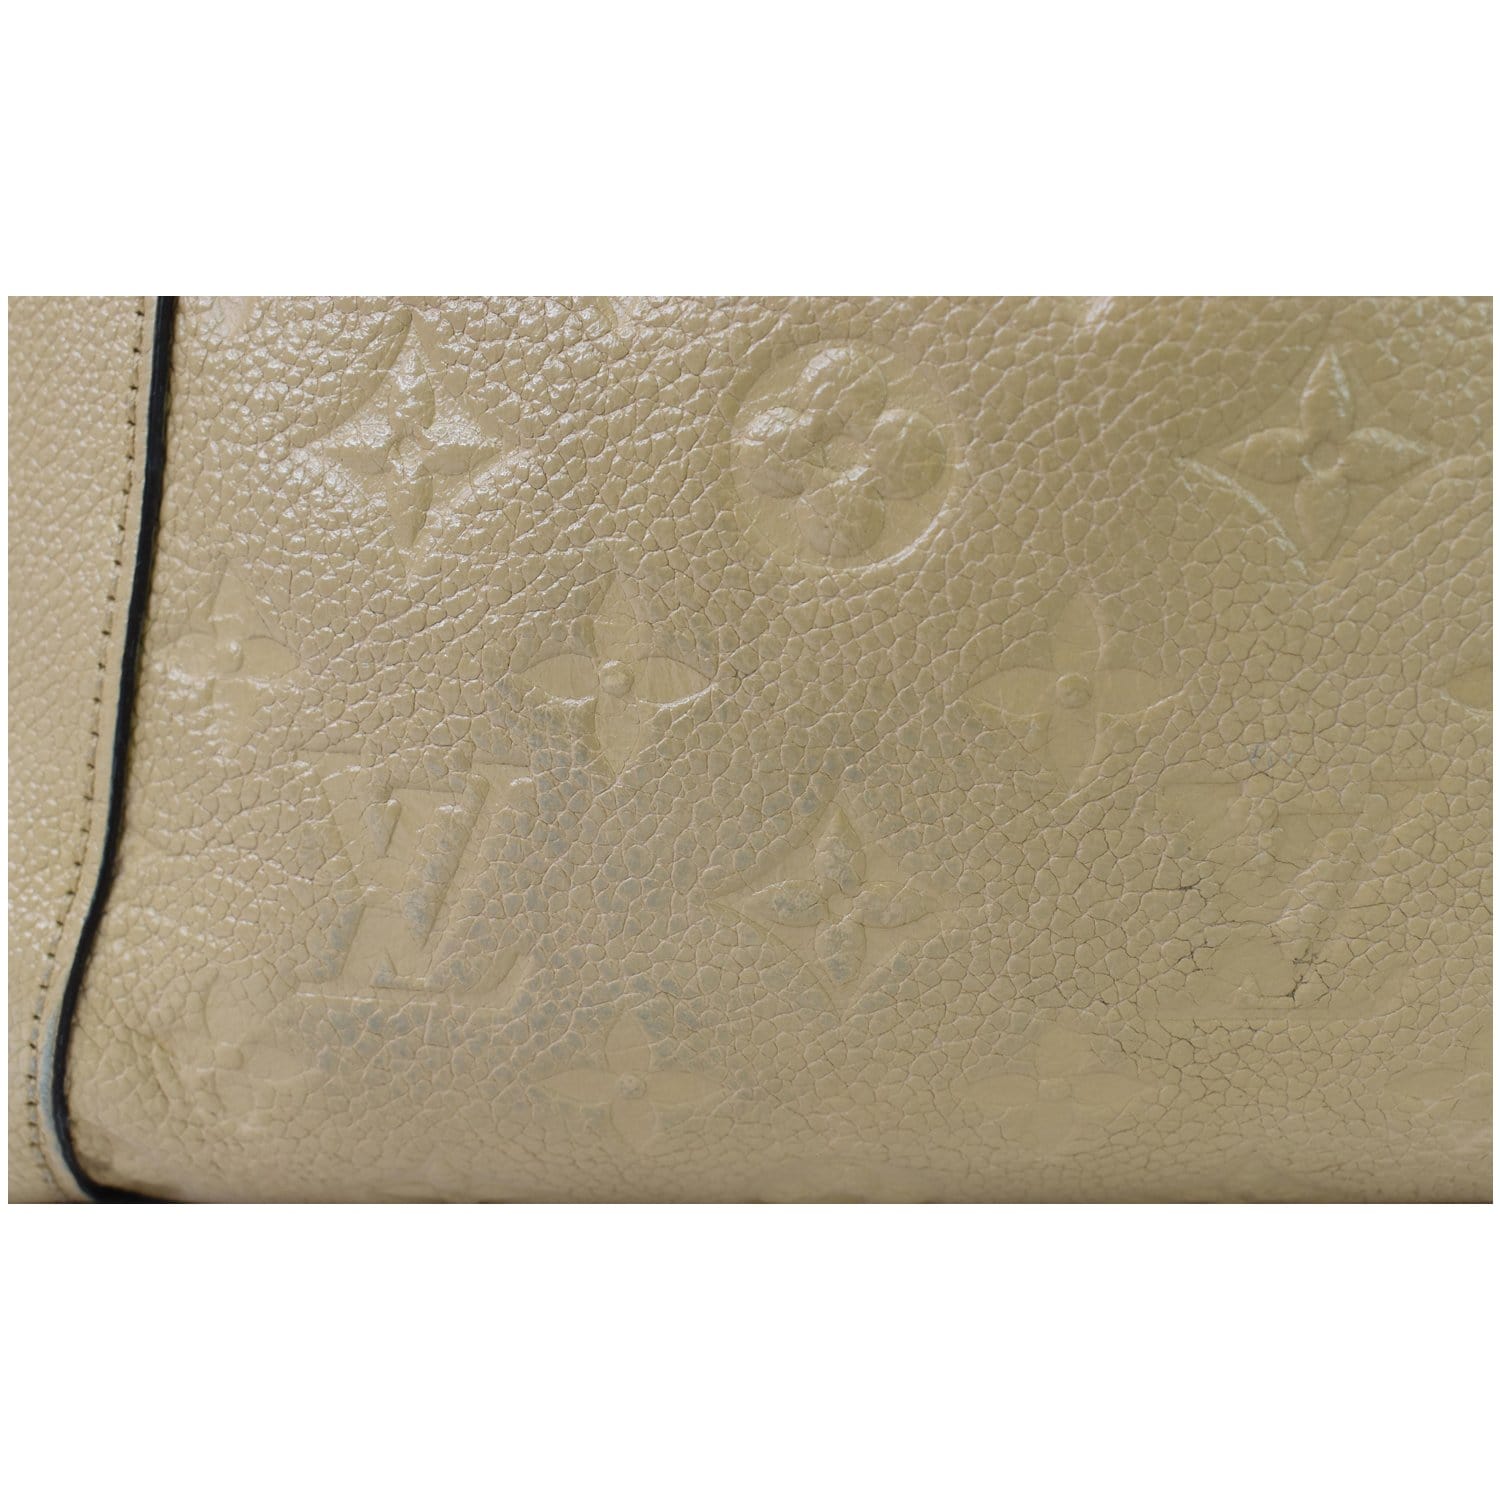 Louis Vuitton Bagatelle - 2 For Sale on 1stDibs  bagatelle lv price, louis  vuitton bagatelle monogram, louis vuitton bagatelle vintage